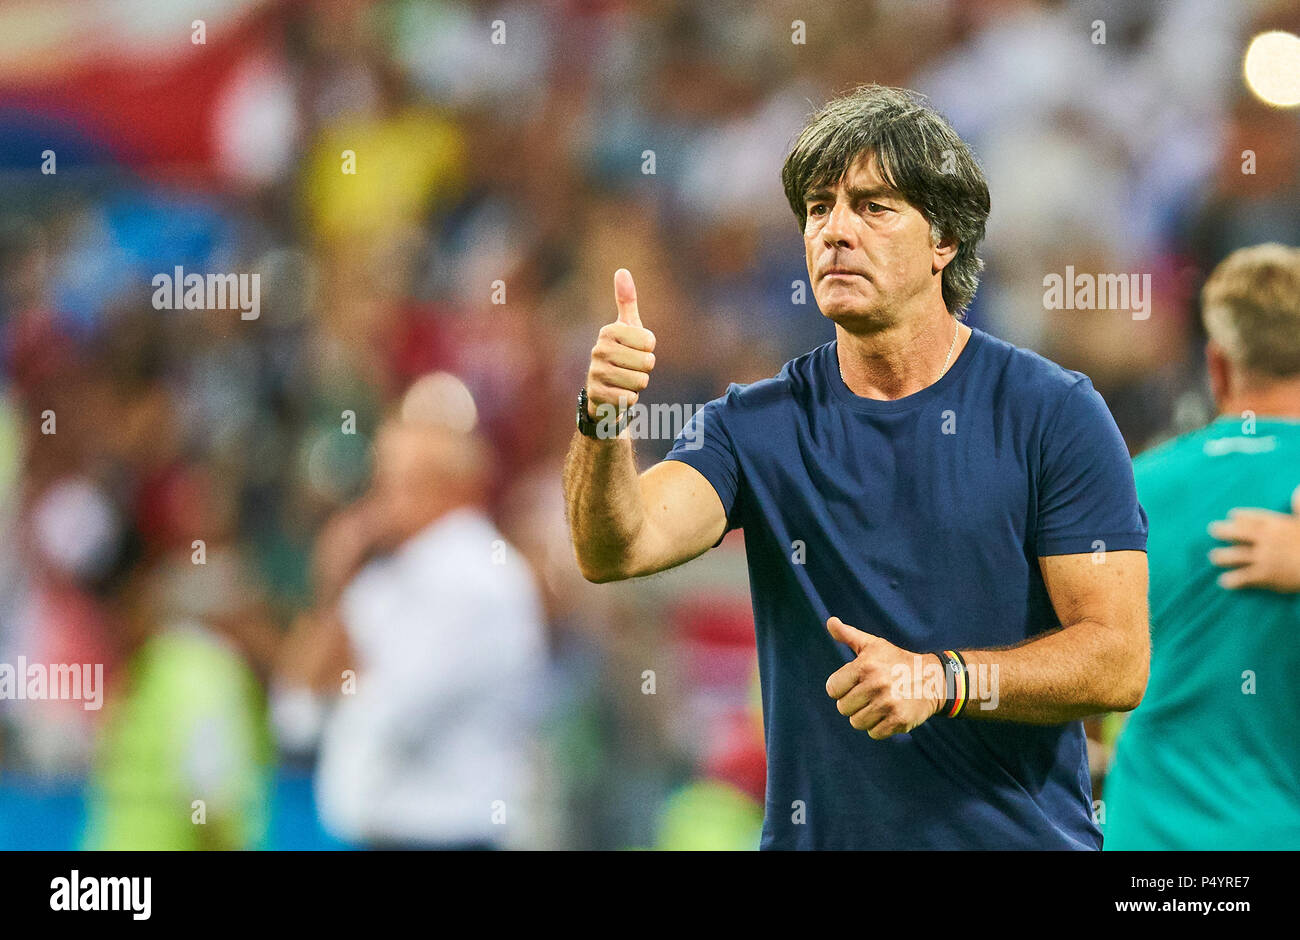 Socchi, Russia. 23 June 2018   DFB headcoach Joachim Jogi LOEW, LÖW, thumbs up, Cheering, joy, emotions, celebrating, laughing, cheering, rejoice, tearing up the arms, clenching the fist,  GERMANY - SWEDEN FIFA WORLD CUP 2018 RUSSIA, Group F, Season 2018/2019,  June 23, 2018  Fisht Olympic Stadium in Sotchi, Russia.  © Peter Schatz / Alamy Live News Stock Photo